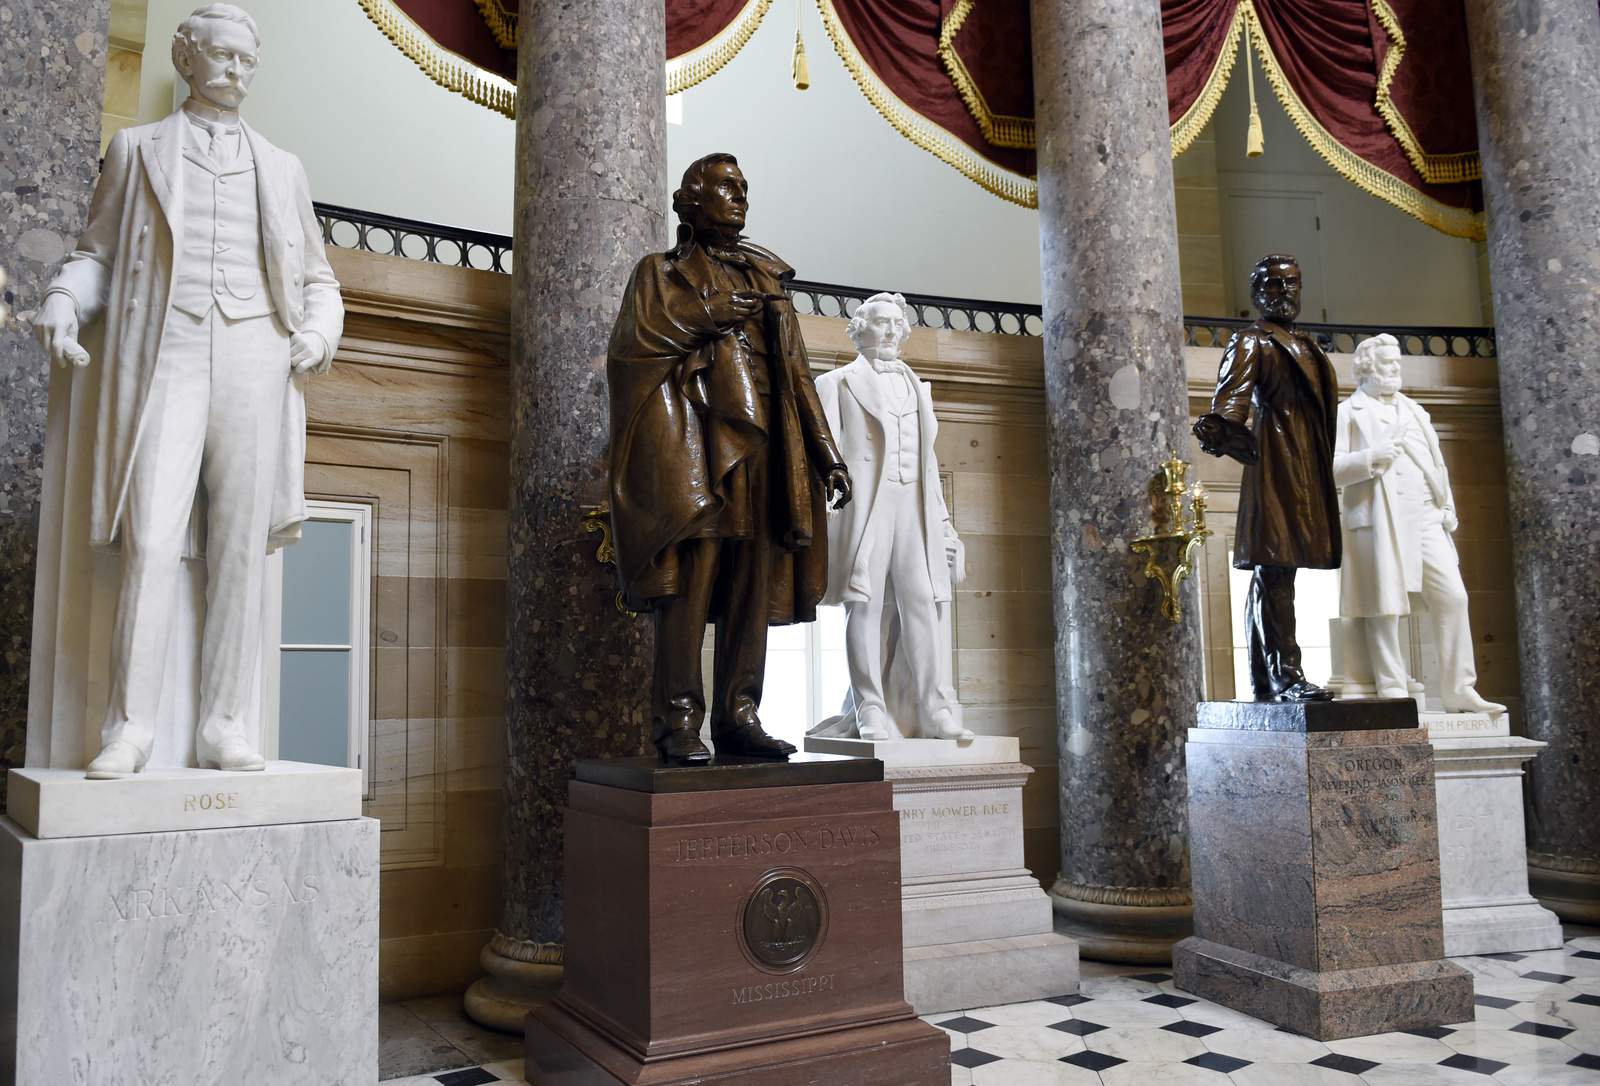 Senate panel OKs removing Confederate names from bases